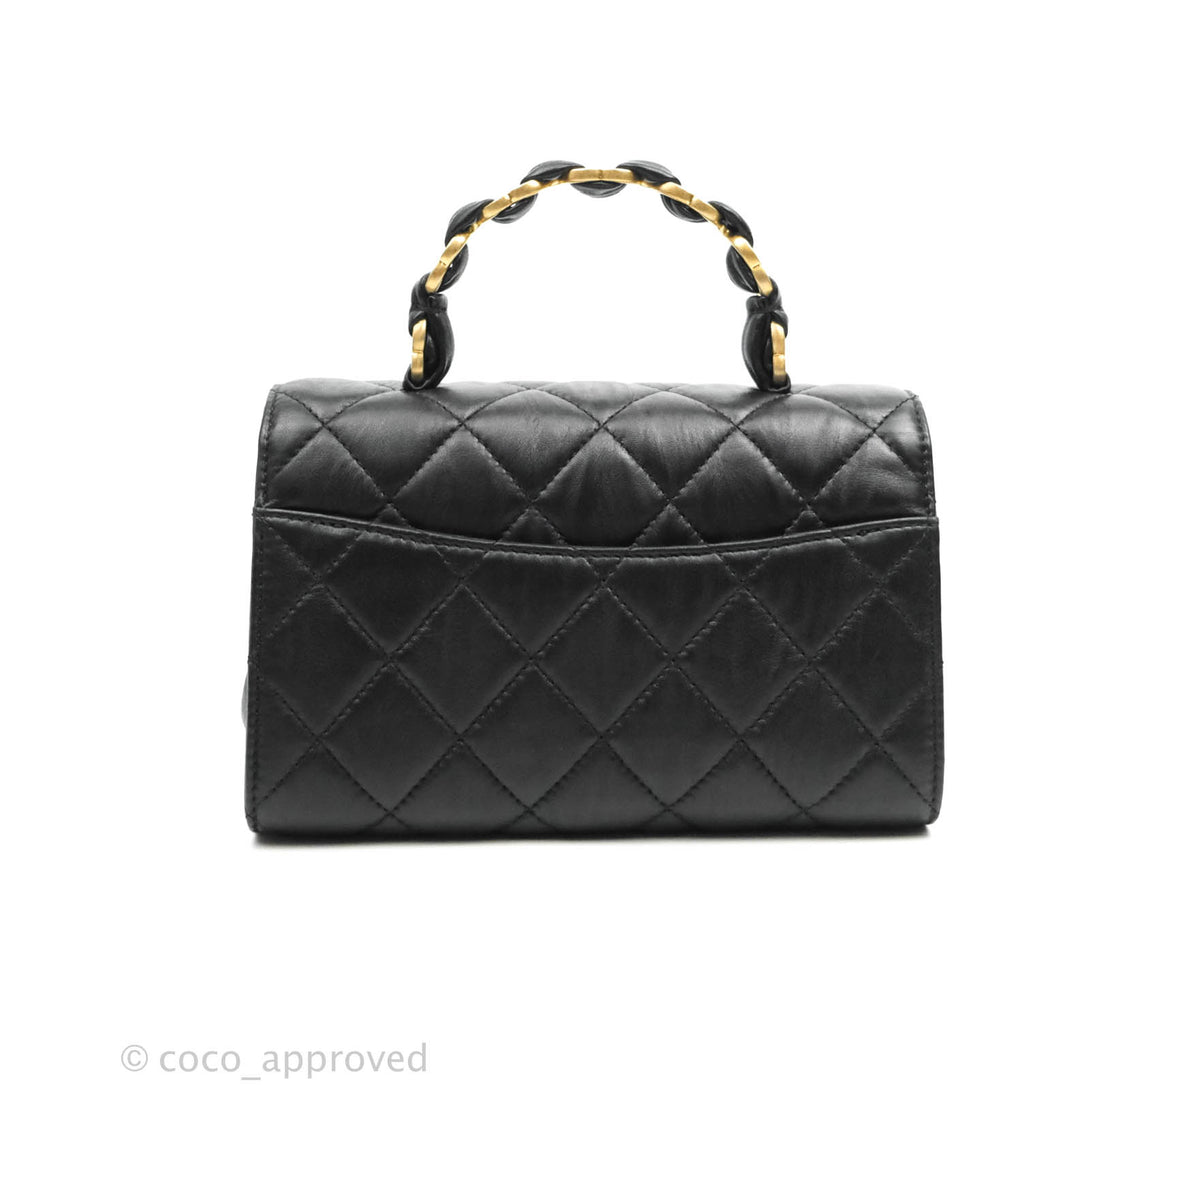 chanel gift with purchase bag